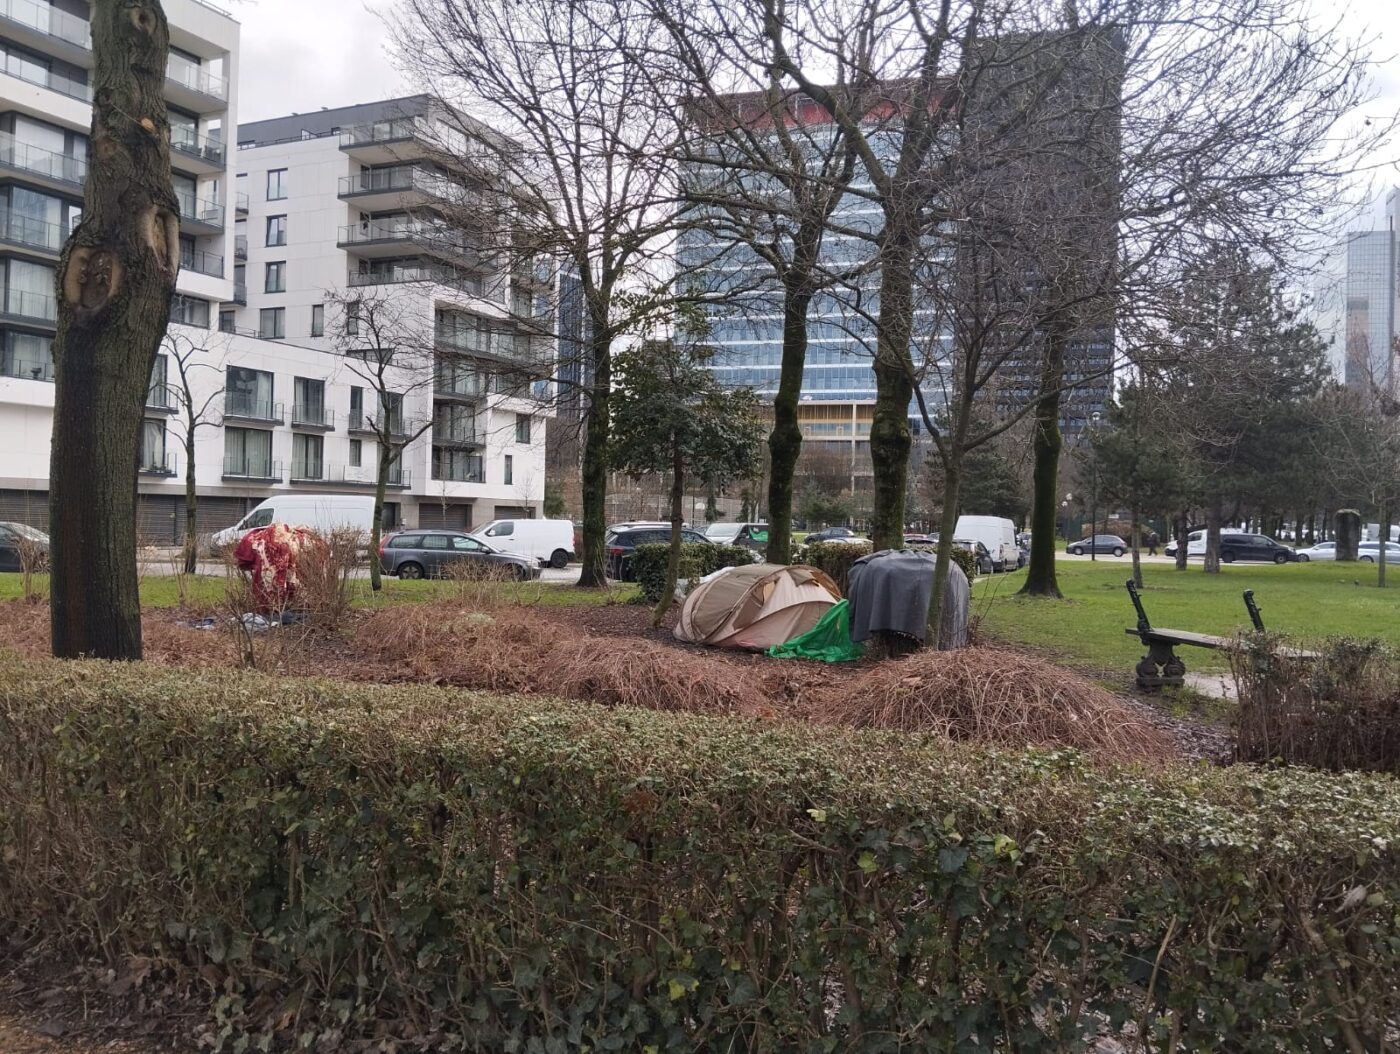 remainings of the belonging of individuals sleeping in the Maximilian park